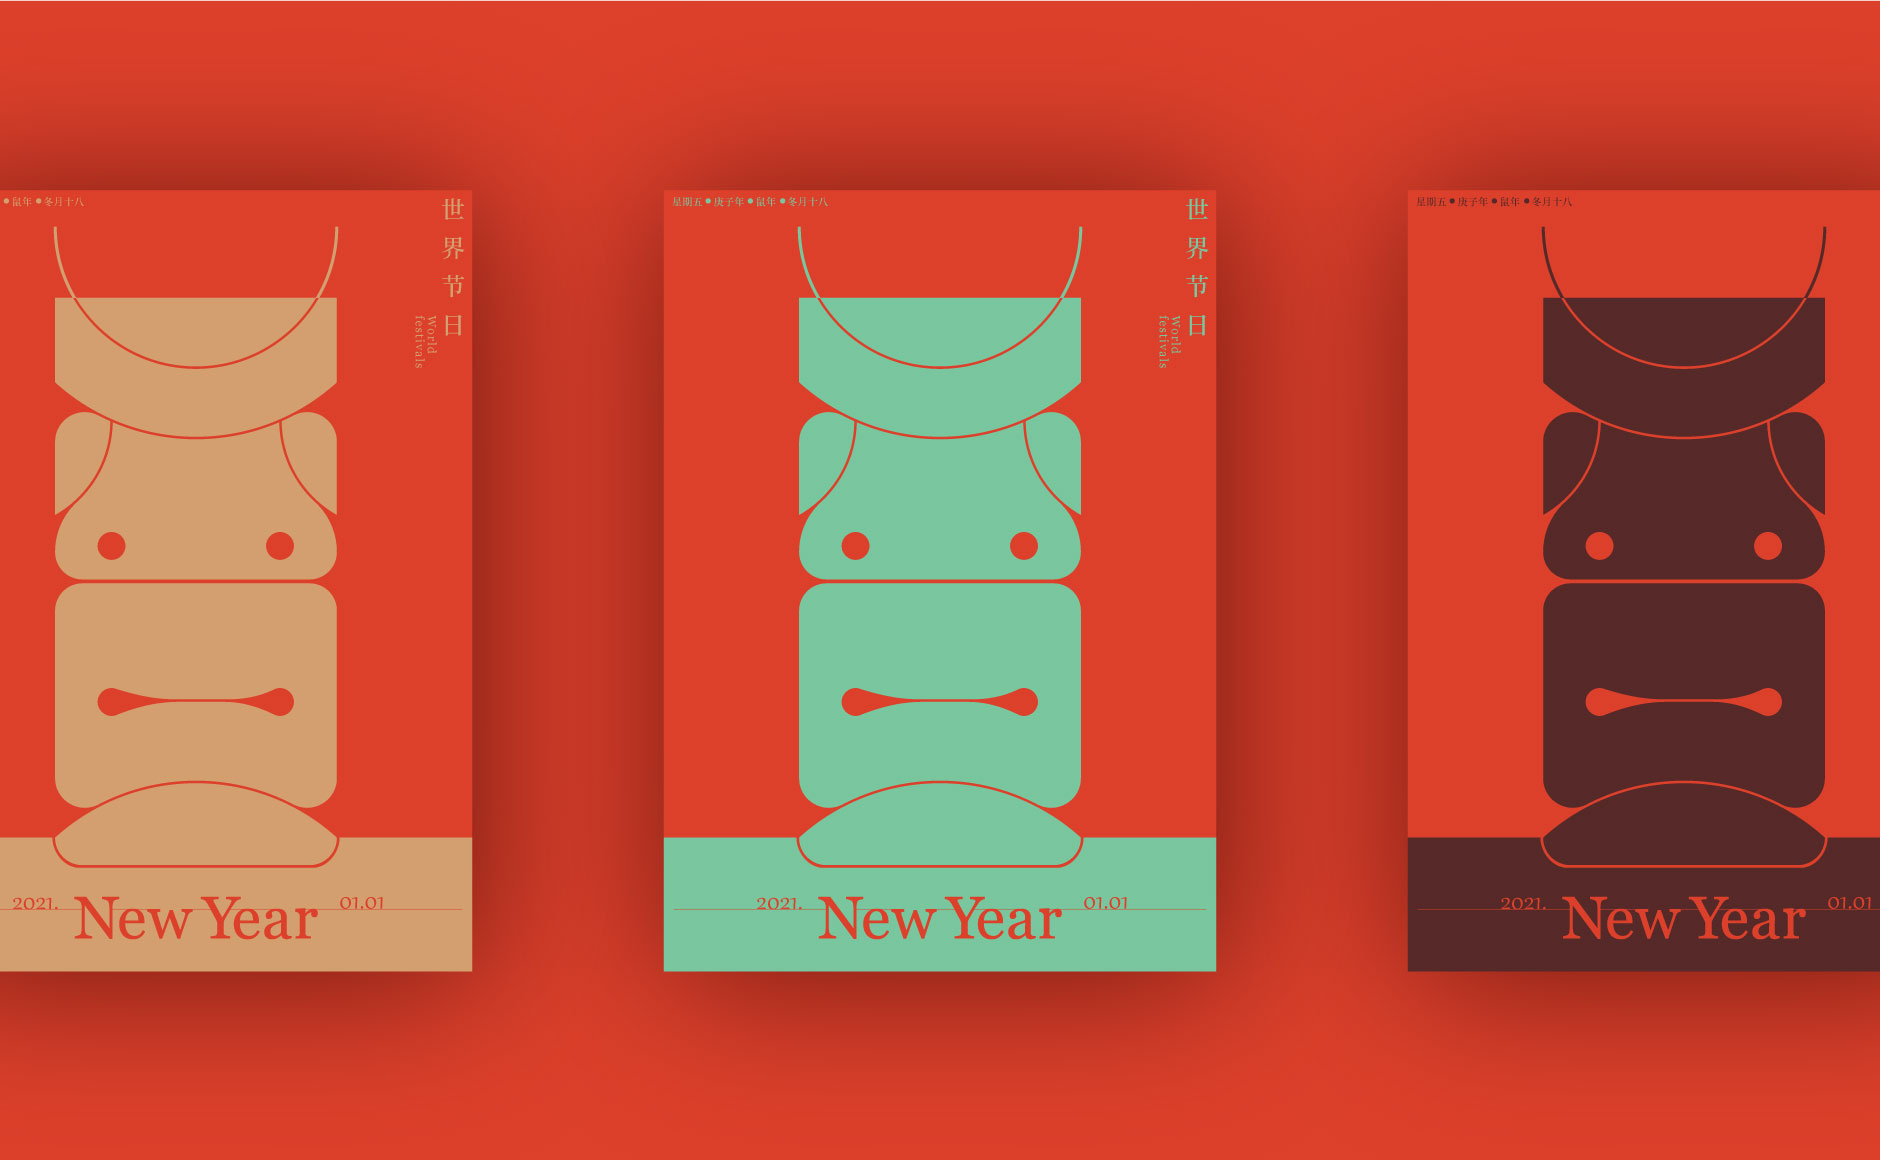 Explore the possibility of fonts and traditional culture-happy new year